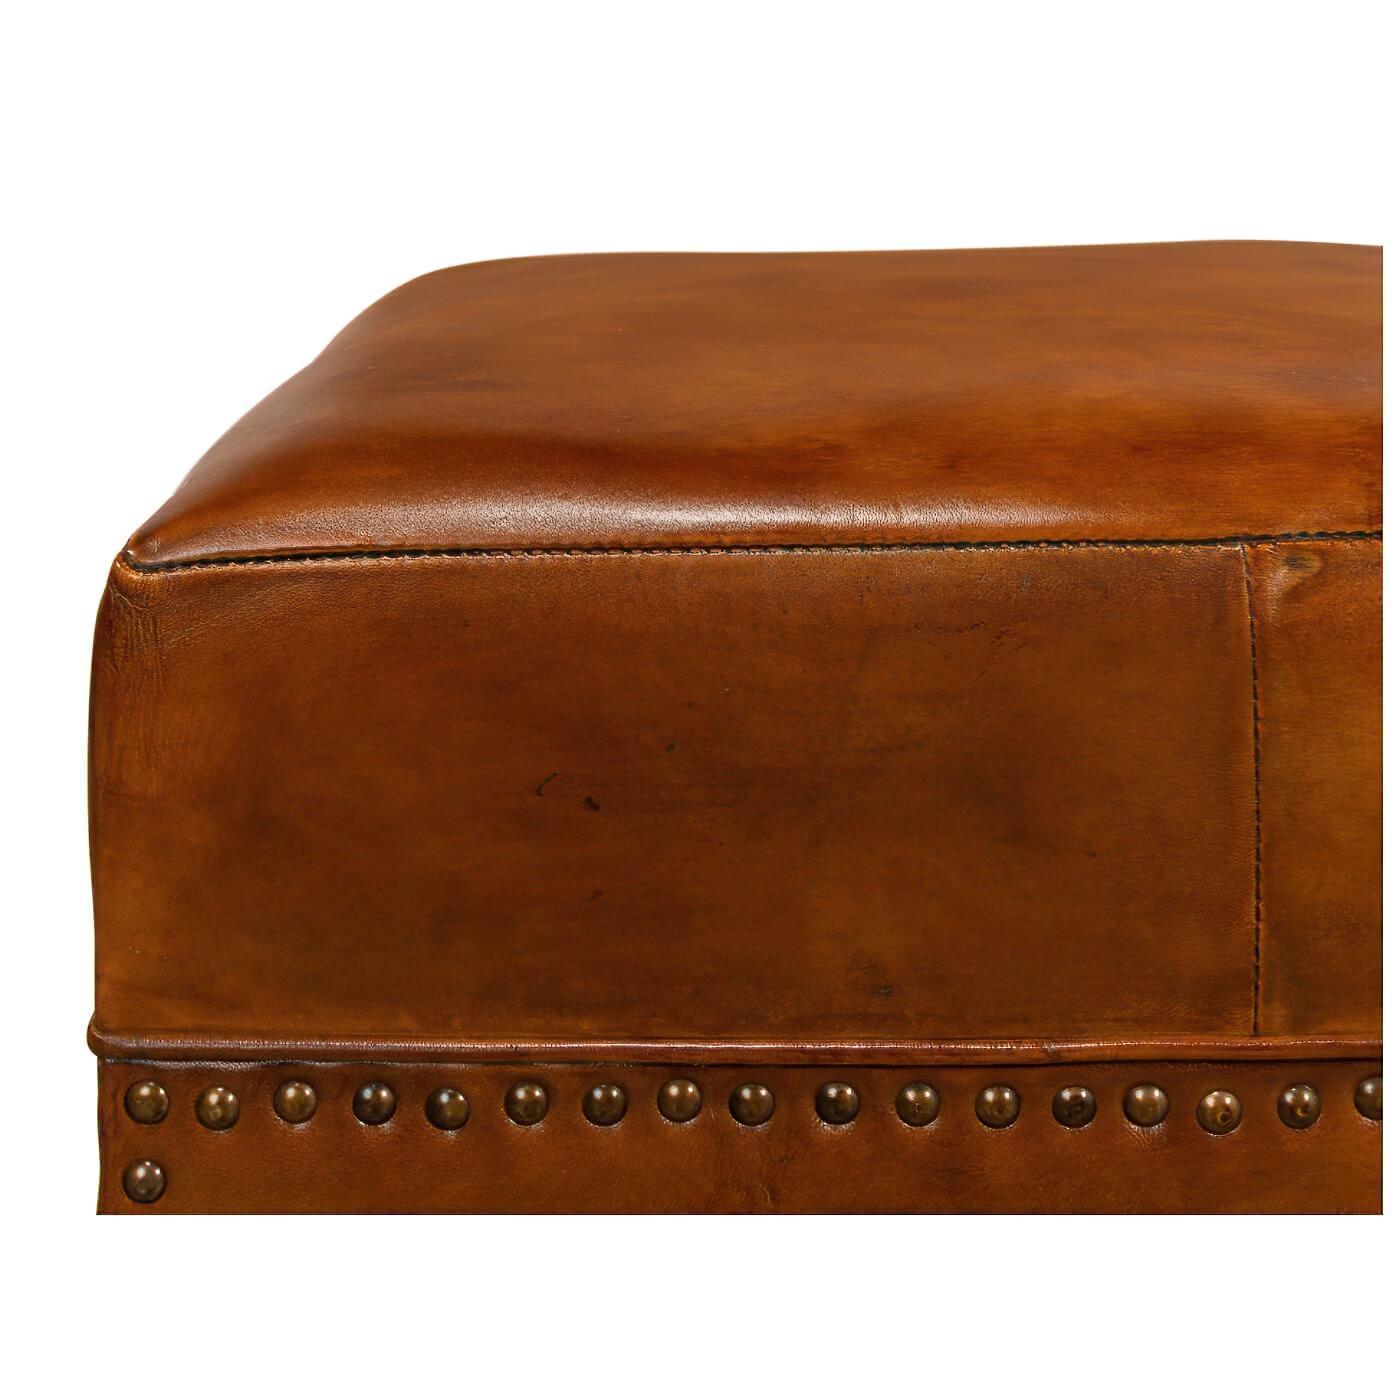 A modern leather arch base ottoman. Crafted in rich brown leather, this ottoman is accented with small brass nailhead trim. The unique open decorative arched base makes this small stool a true conversation piece. 

Its practical and comfortable